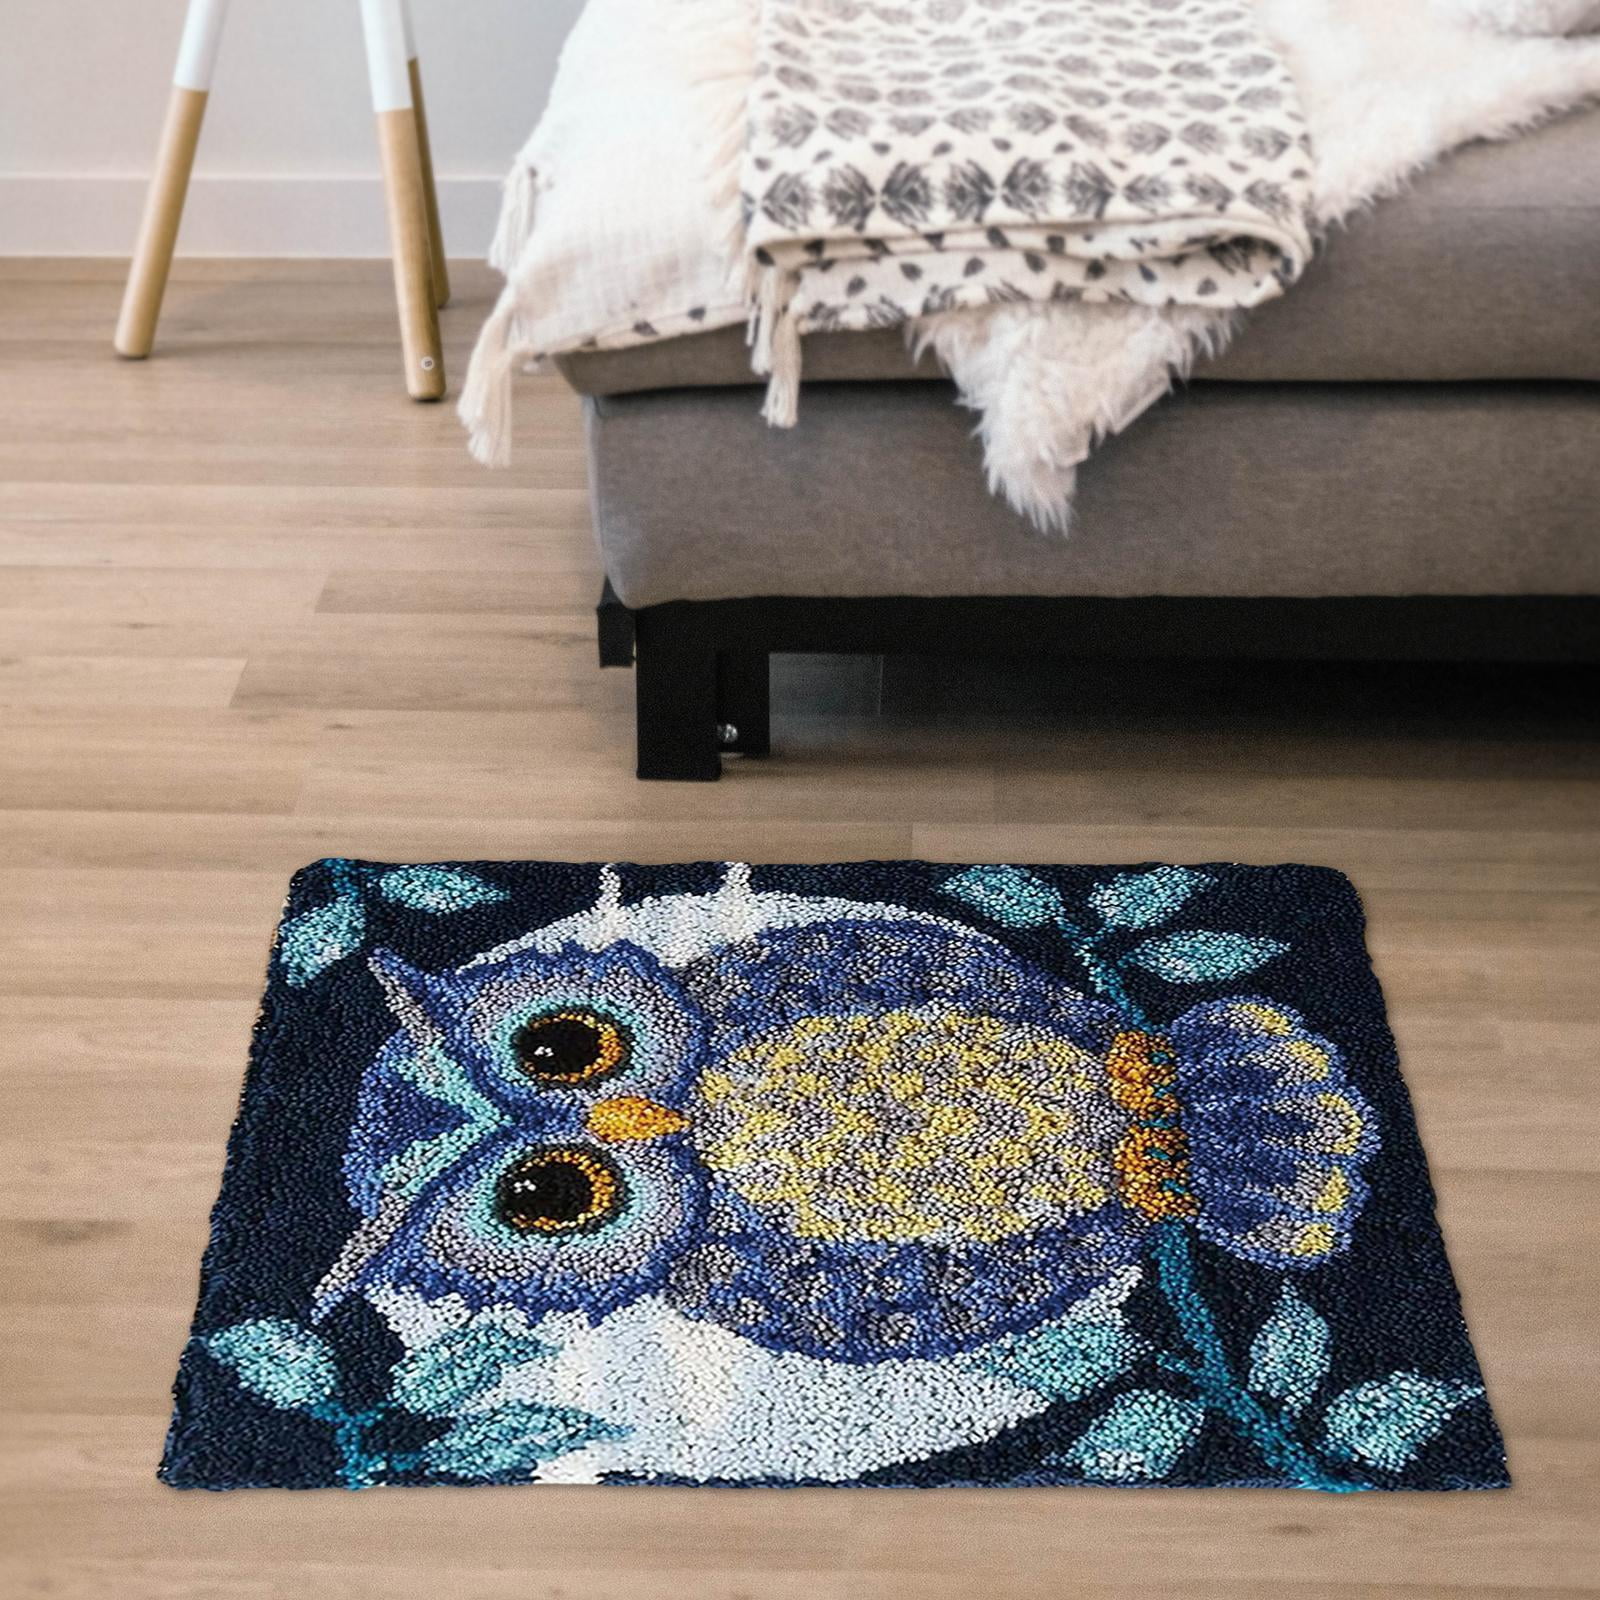 Carpet embroidery with printed pattern Leaf flowers Latch Hook Rugs Kits  for Adults Wool knots tapestry diy rug kit Hook mat